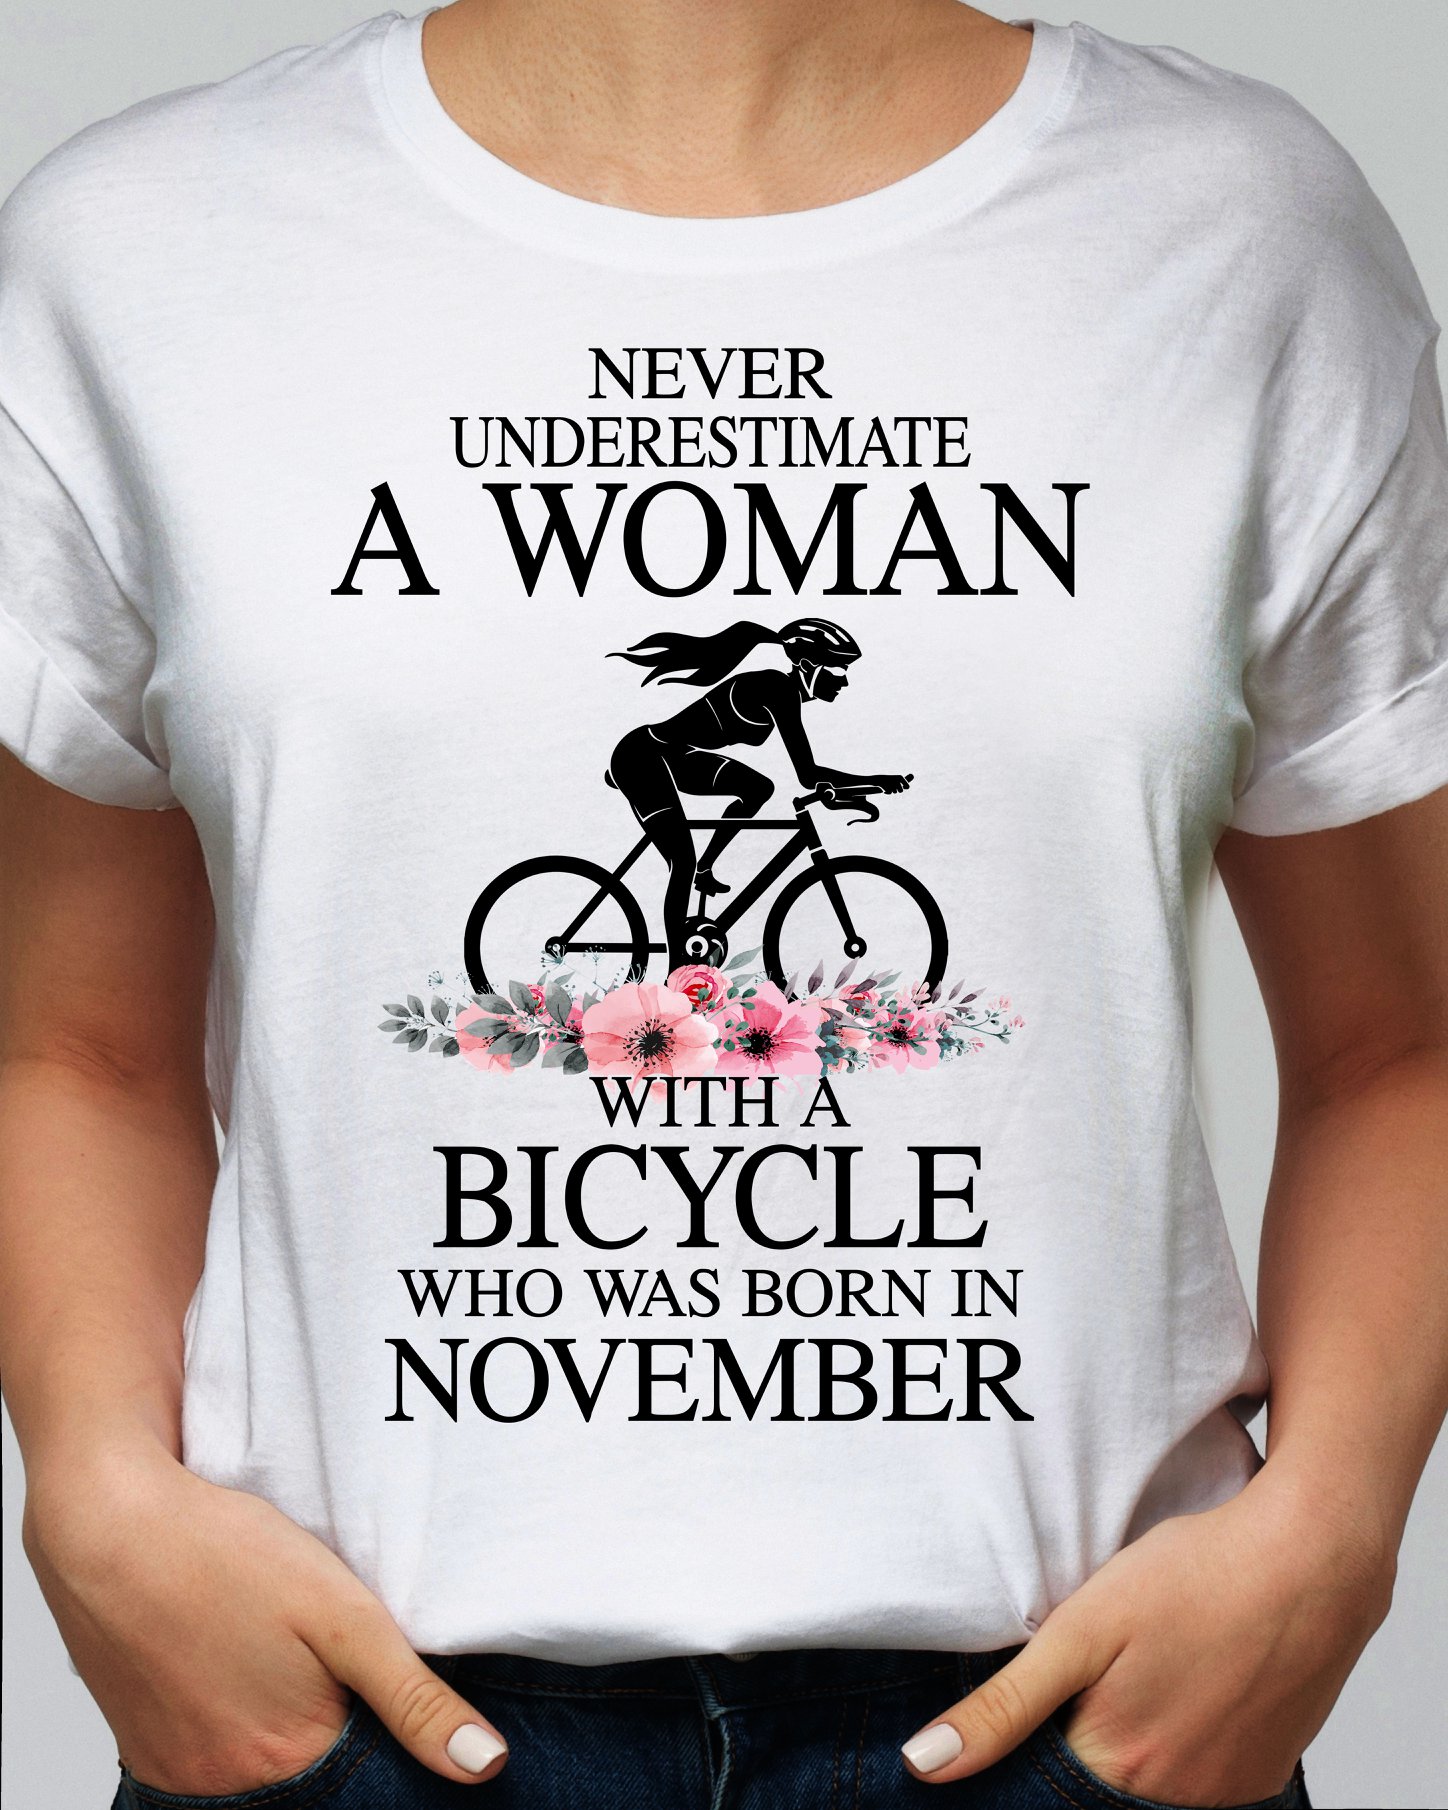 Never underestimate a woman with a bicycle who was born in December